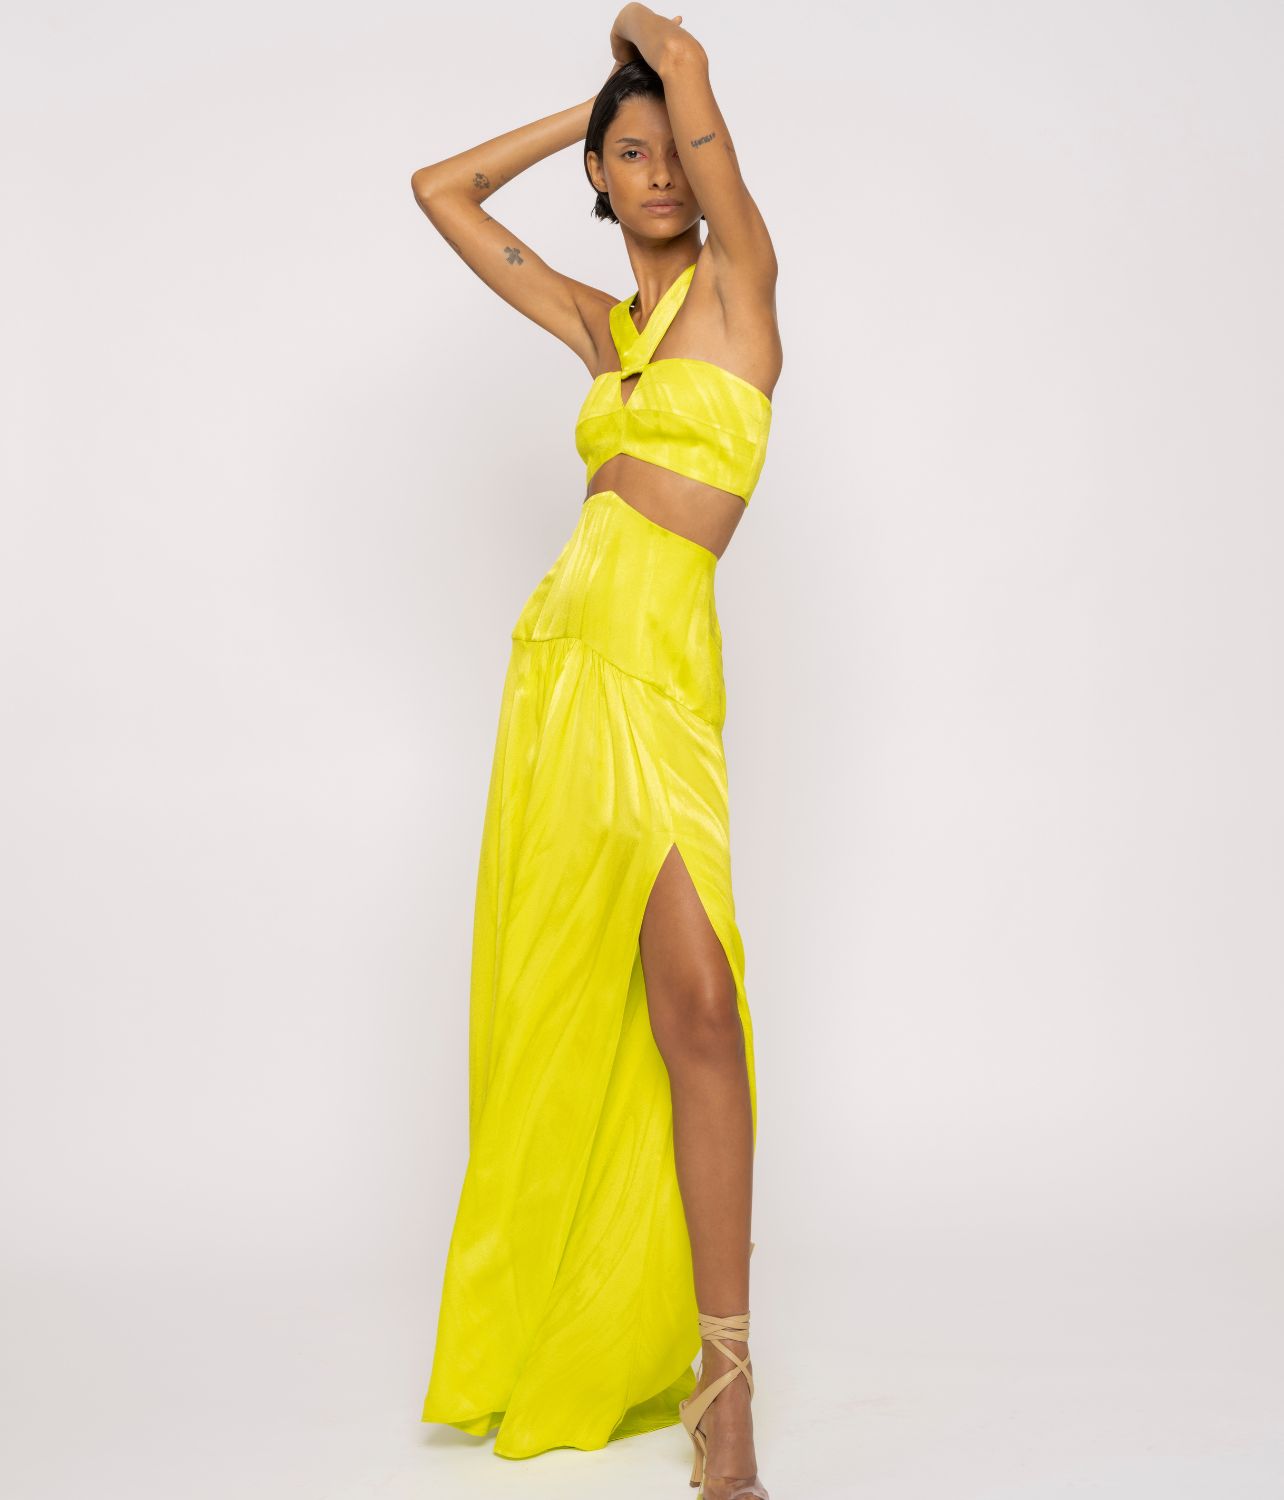 Model wearing yellow Silvia Tcherassi maxi skirt and halter top from their Spring/Summer collection